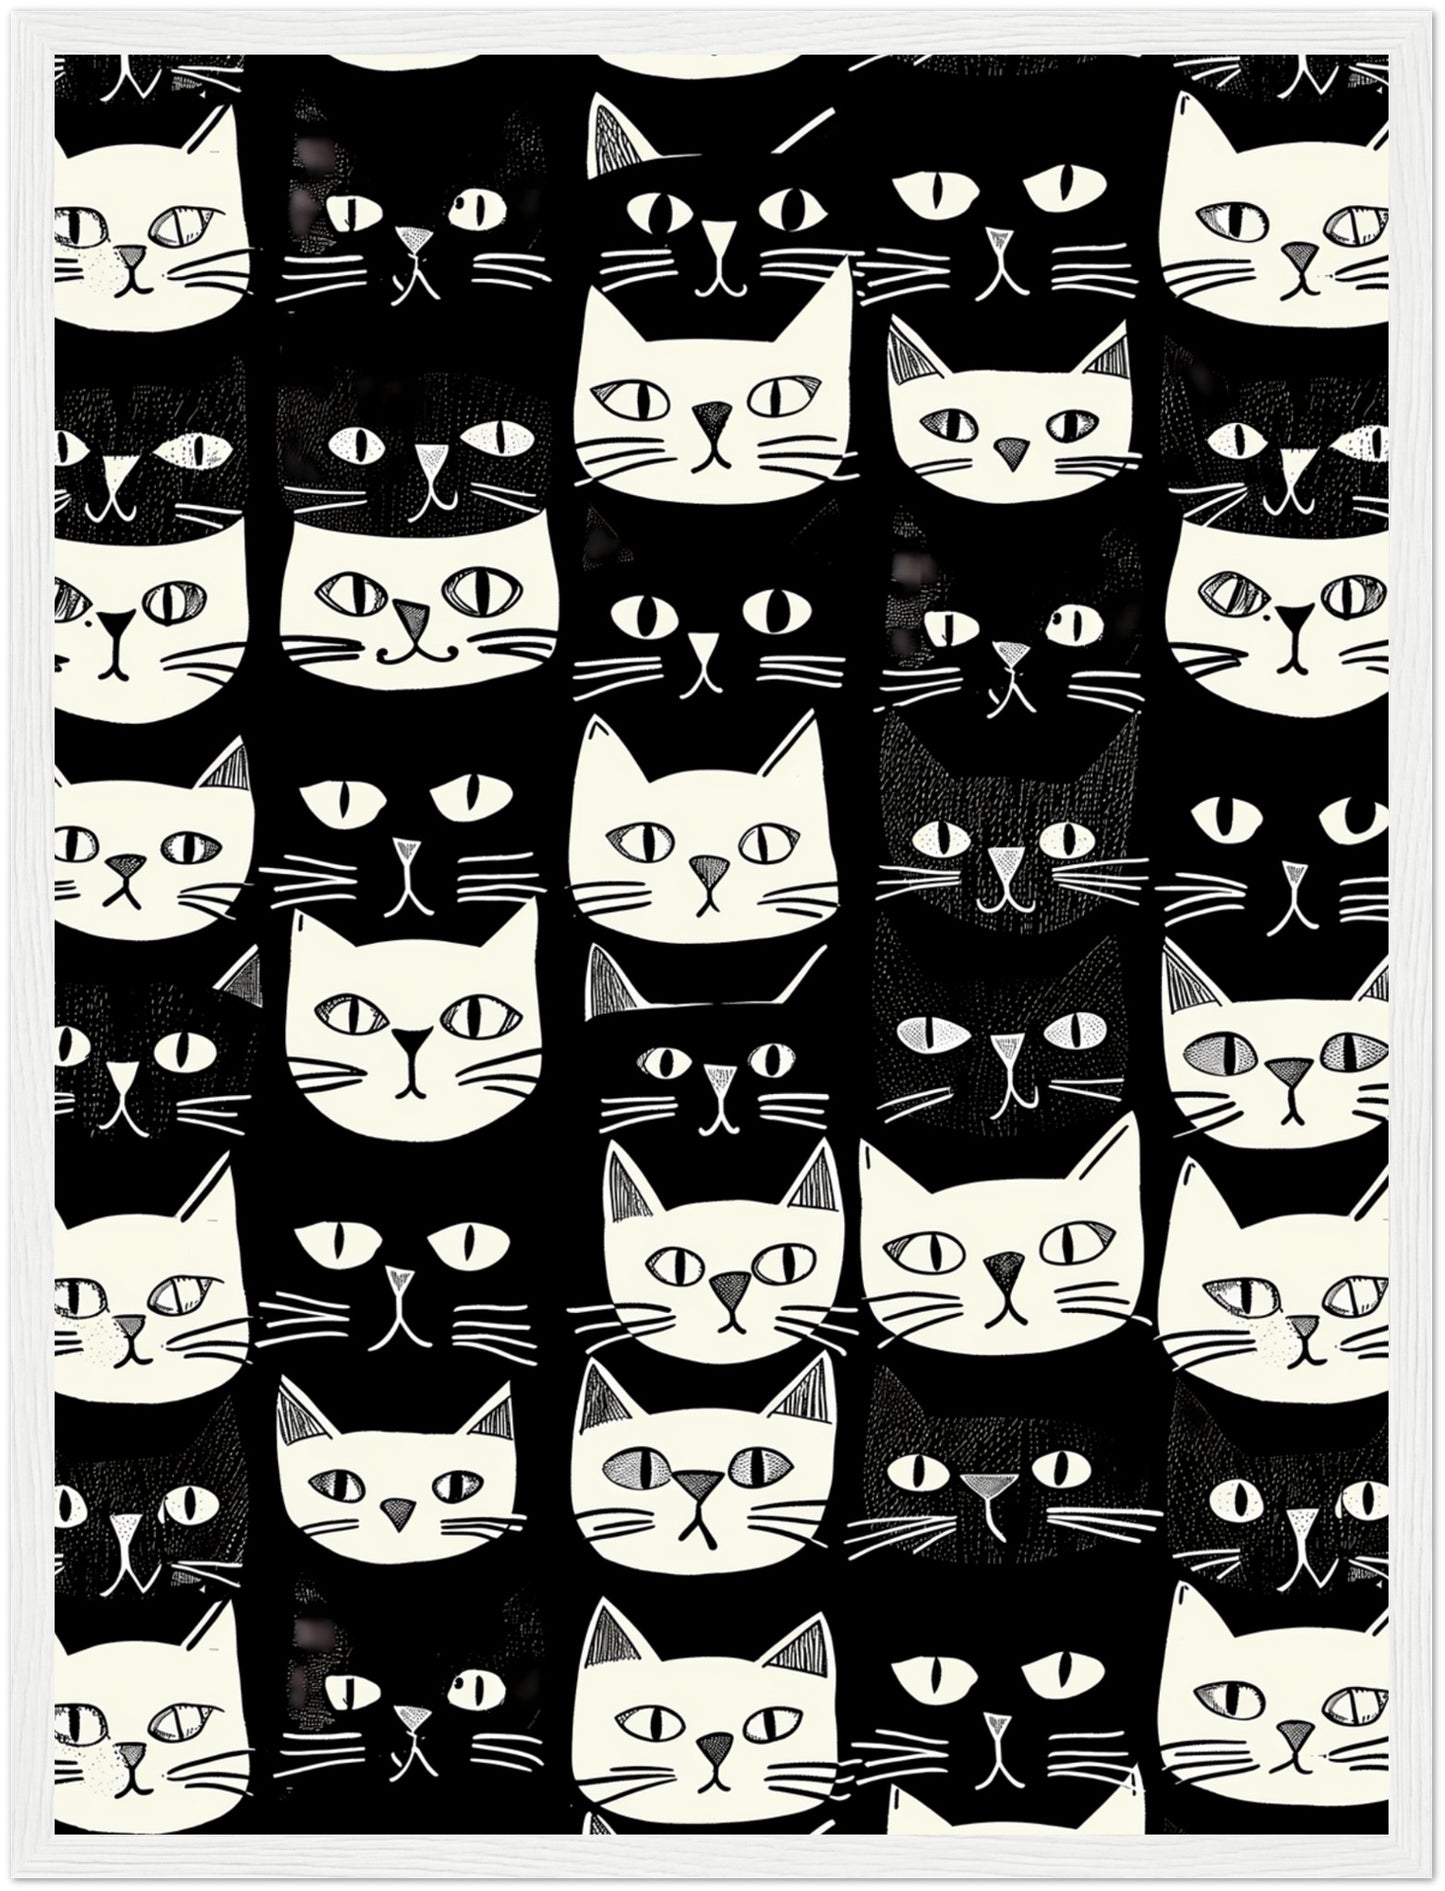 Black and white patterned artwork featuring various stylized cat faces.